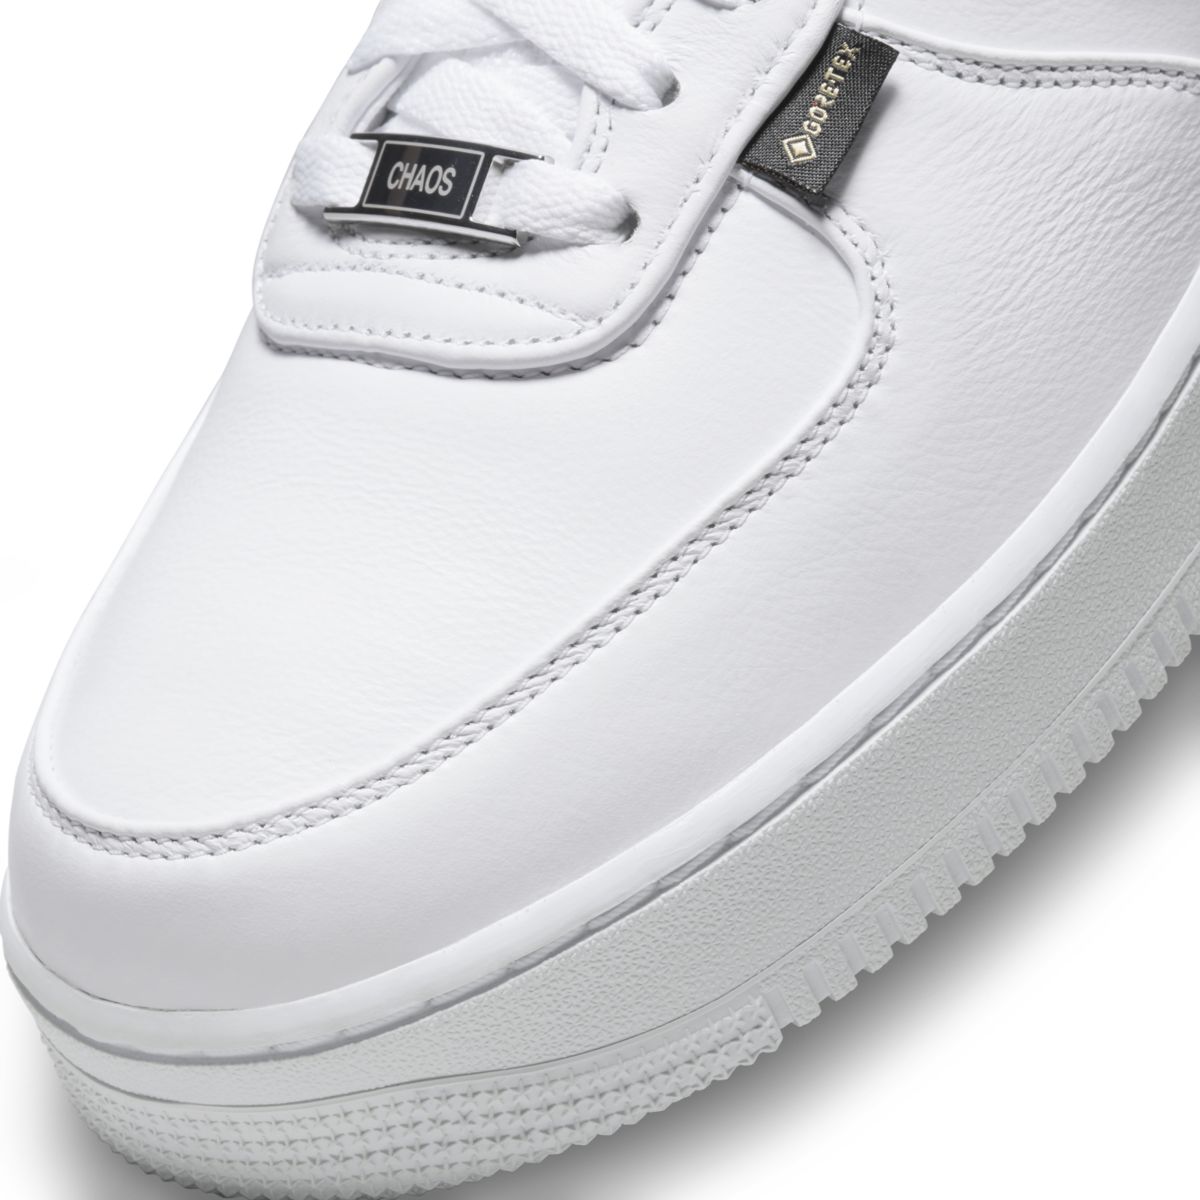 Undercover x Nike Air Force 1 Low White DQ7558-101 9